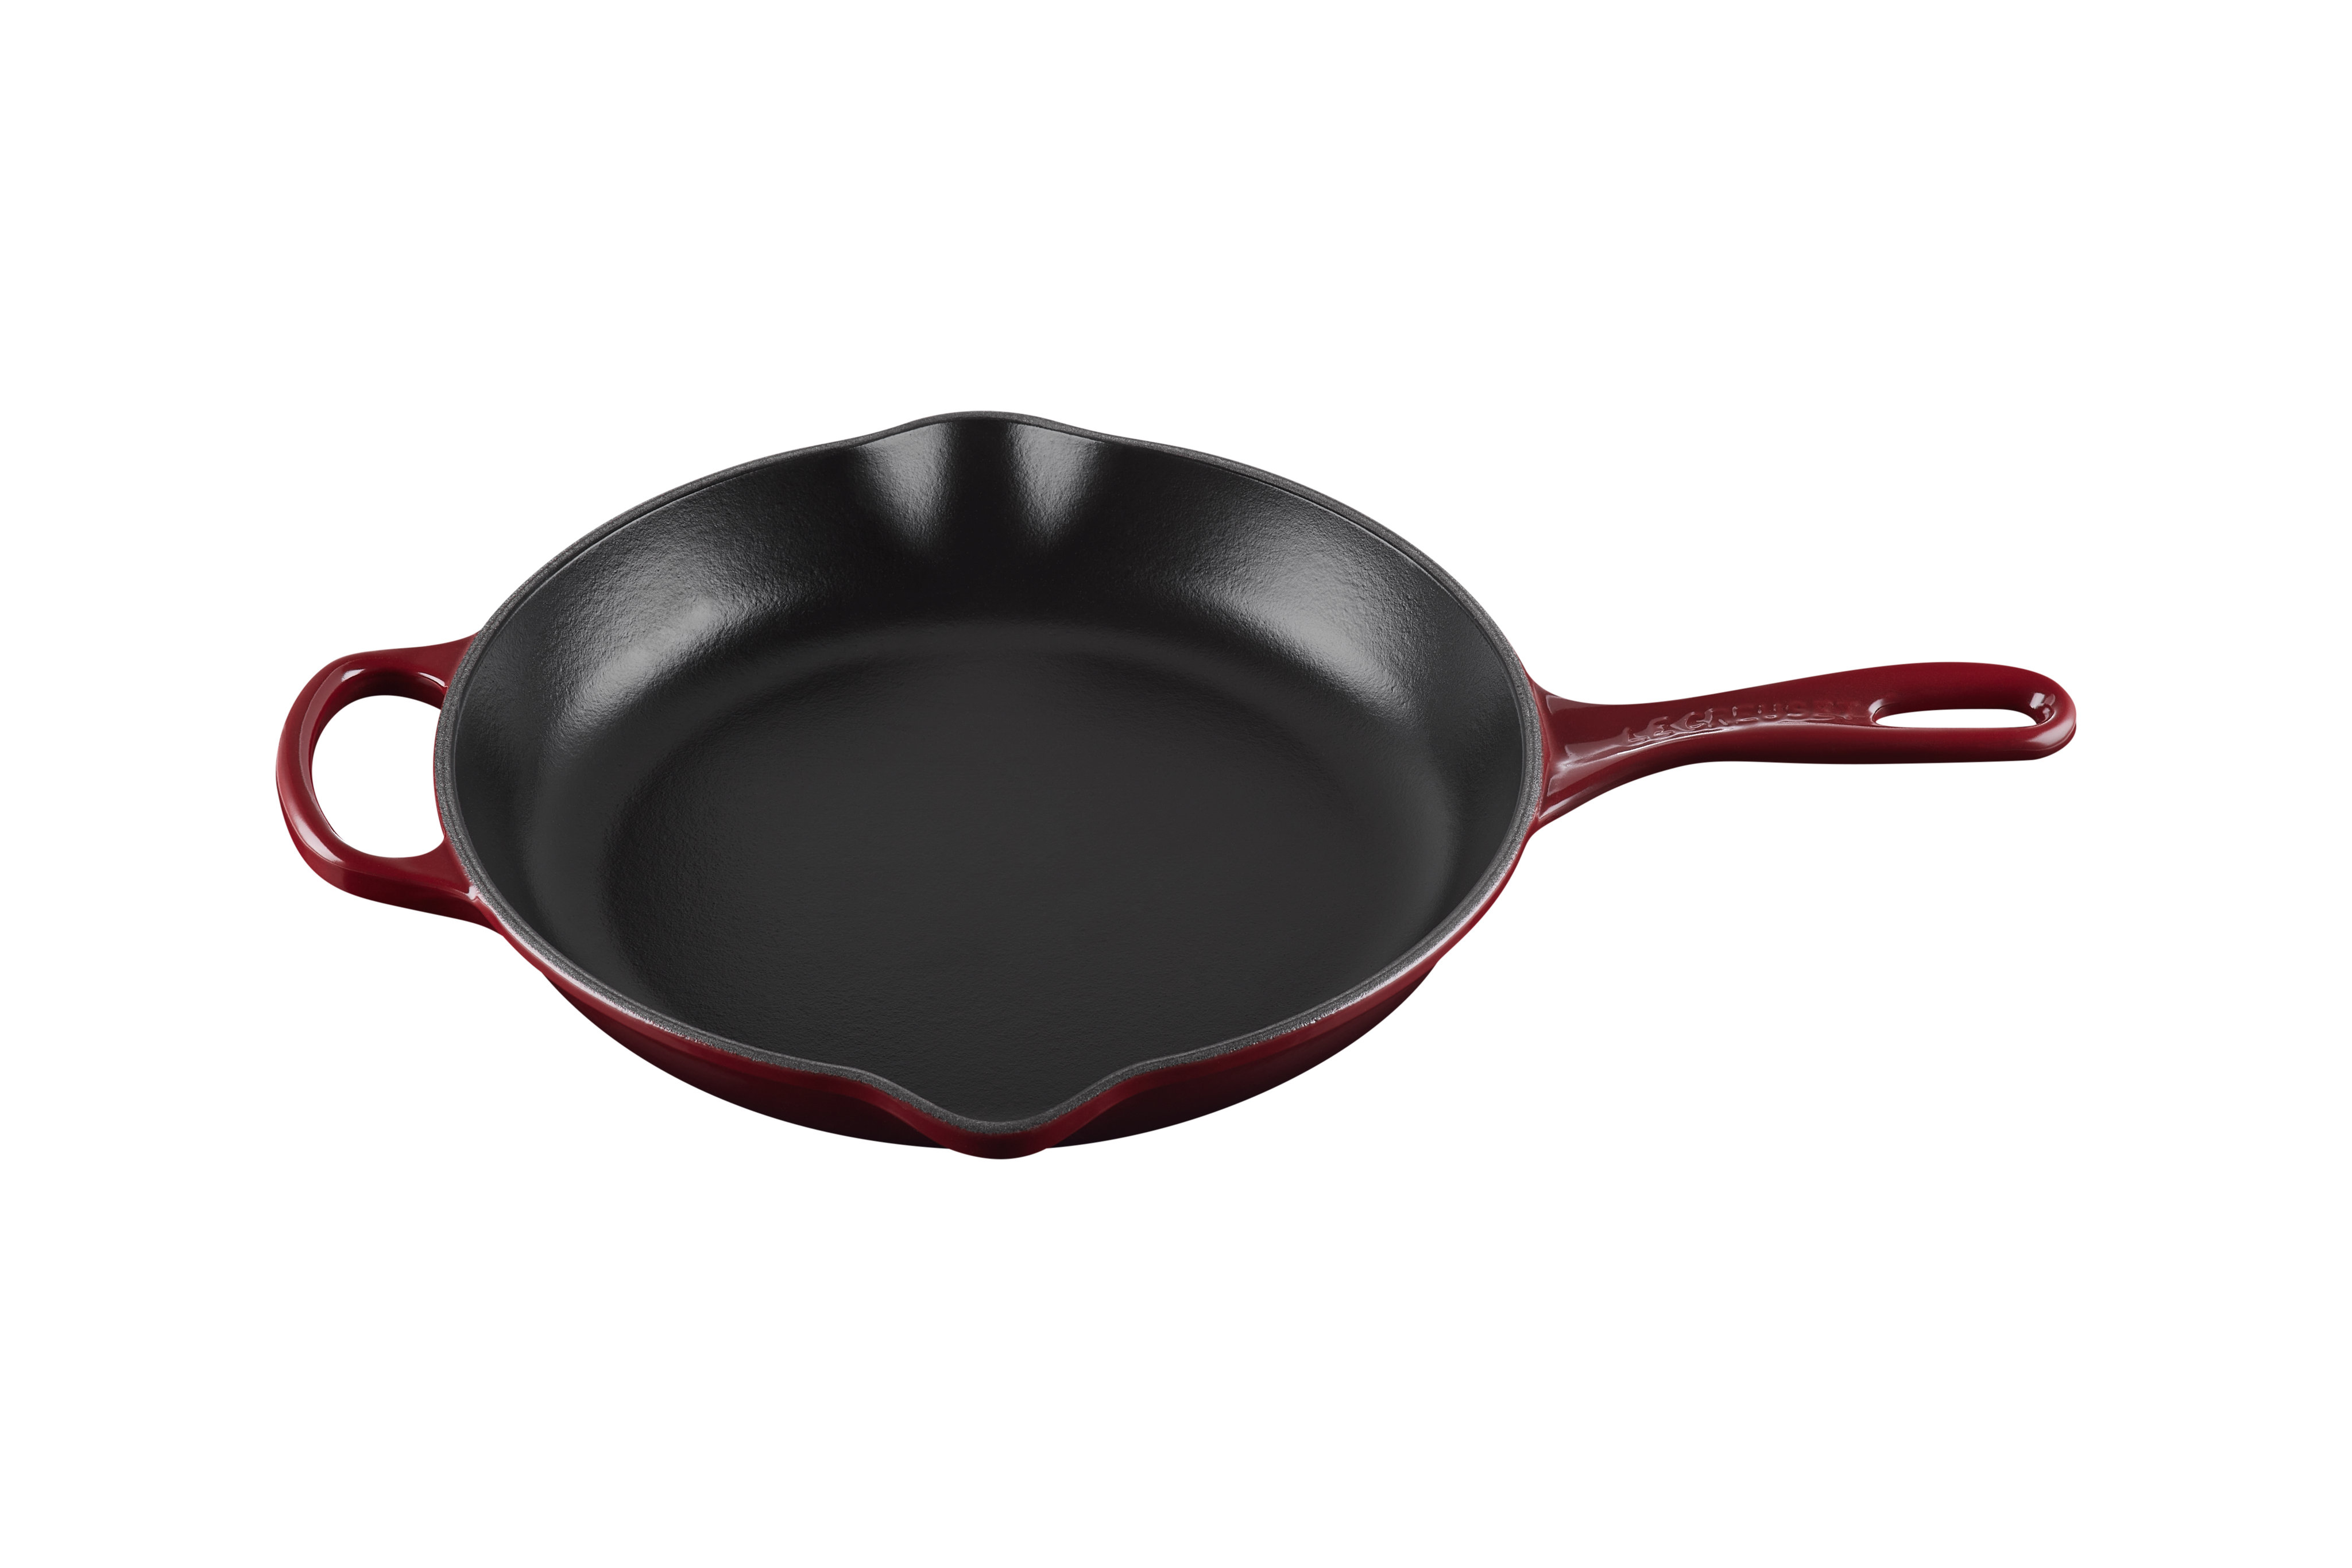 Le Creuset Skillet, 6 Inches, from the Signature Series of